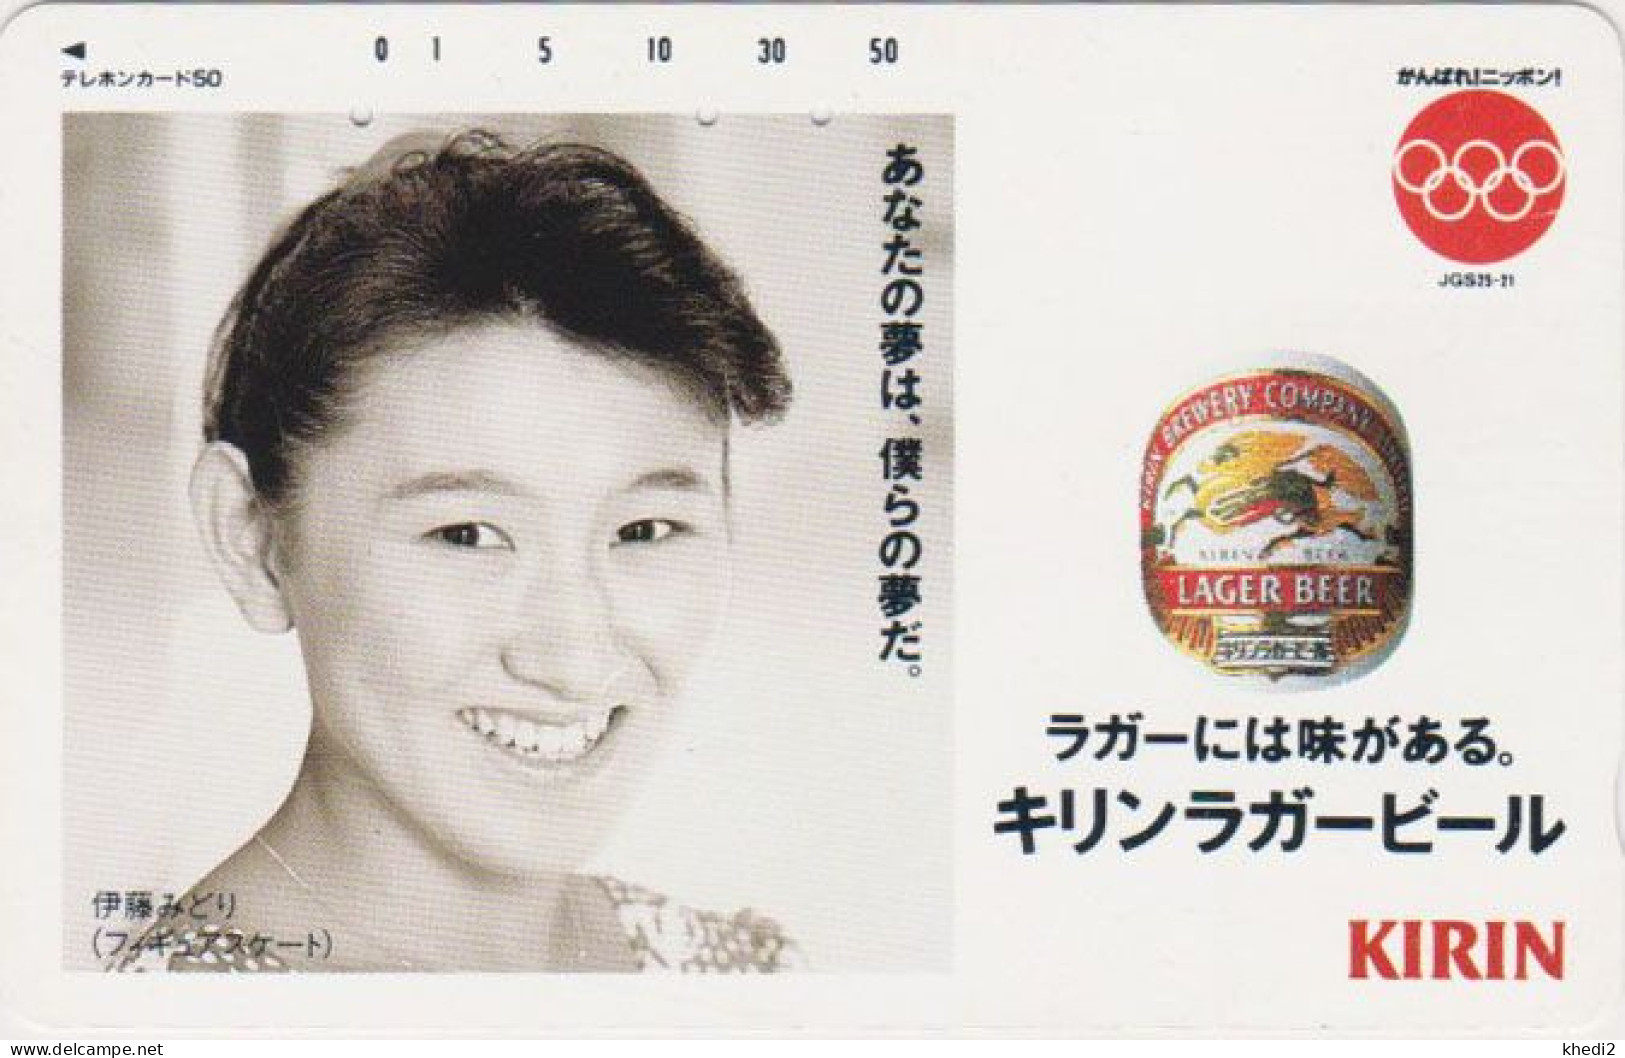 TC JAPON / 110-98355 - BIERE KIRIN & FEMME JO Basketball - BEER Sport Girl Olympic Games JAPAN Free Phonecard - 963 - Jeux Olympiques